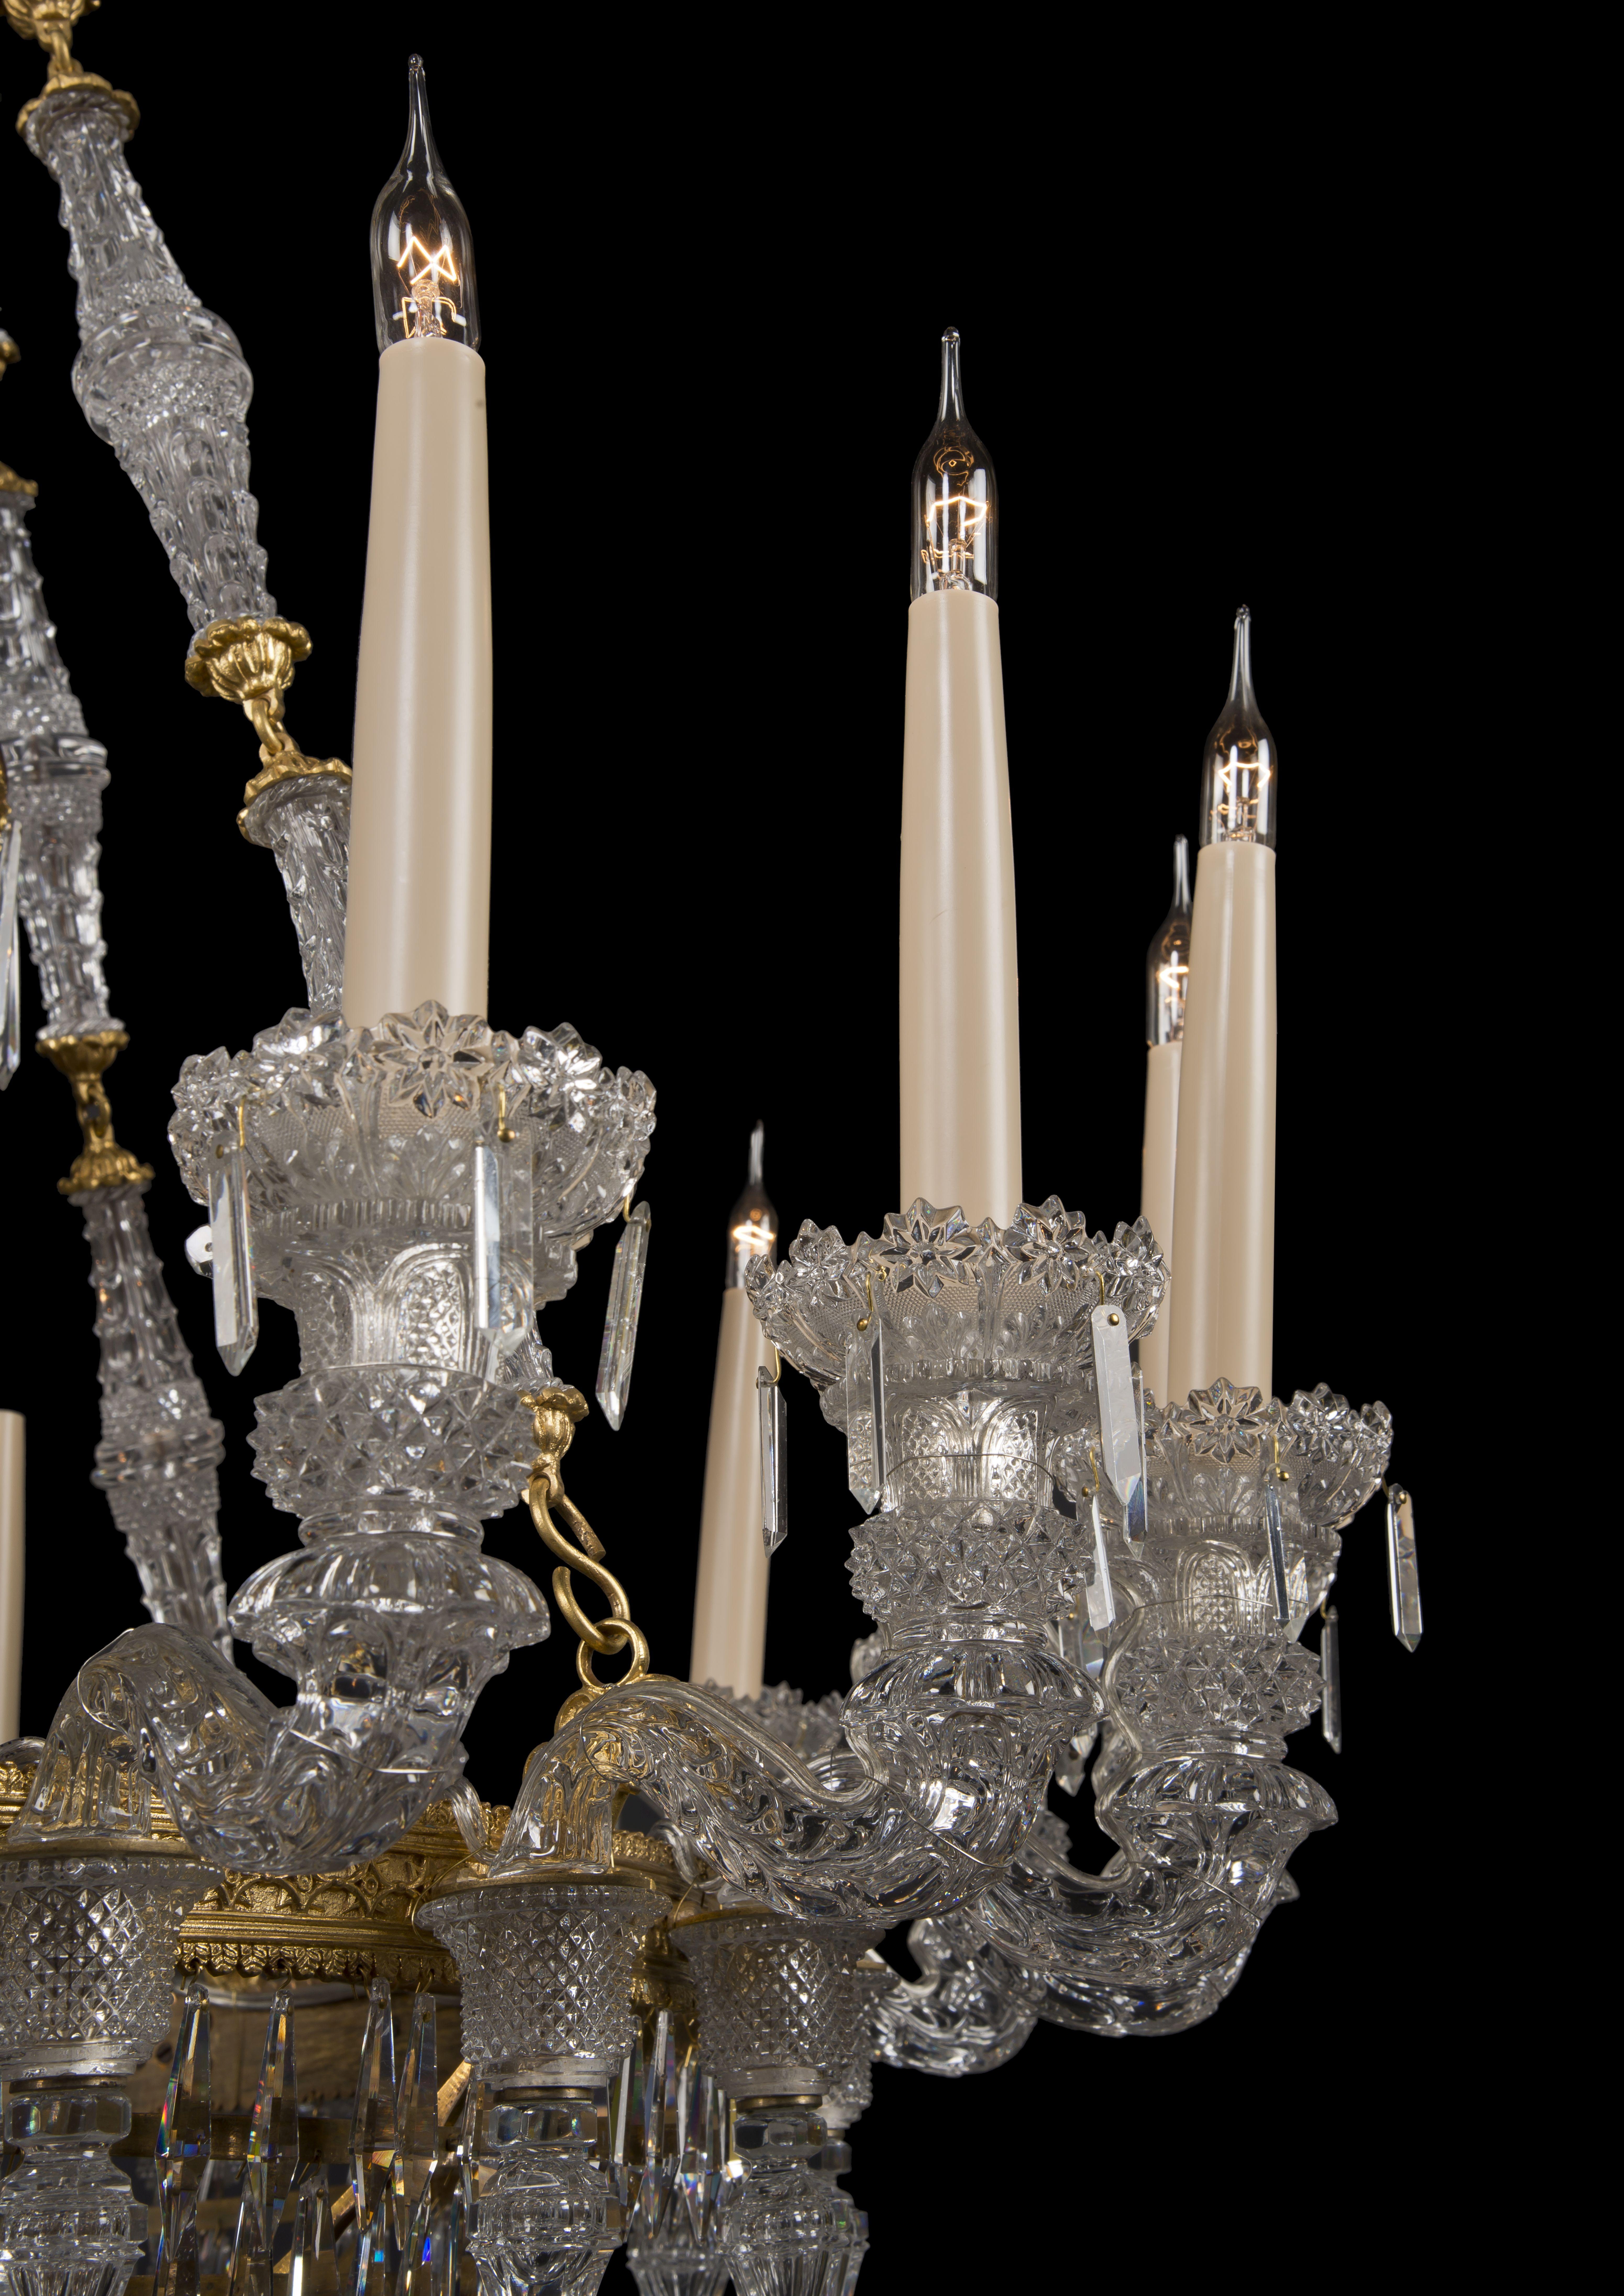 Pair of Eighteen-Light Engraved Glass Chandeliers by Baccarat, circa 1860 In Good Condition For Sale In Brighton, West Sussex